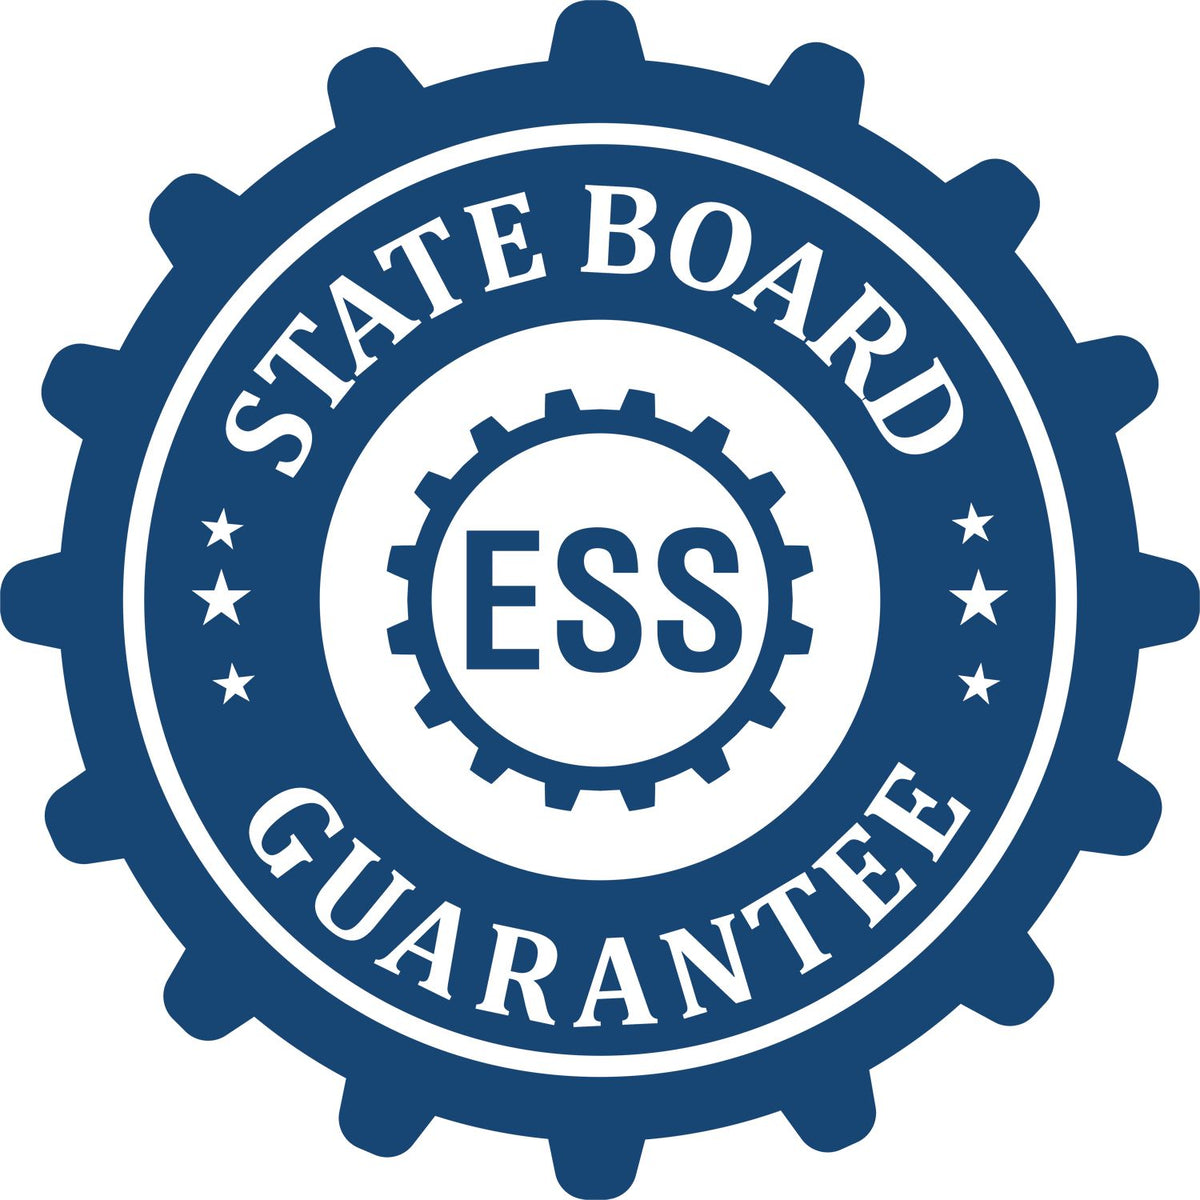 An emblem in a gear shape illustrating a state board guarantee for the State of North Dakota Extended Long Reach Engineer Seal product.